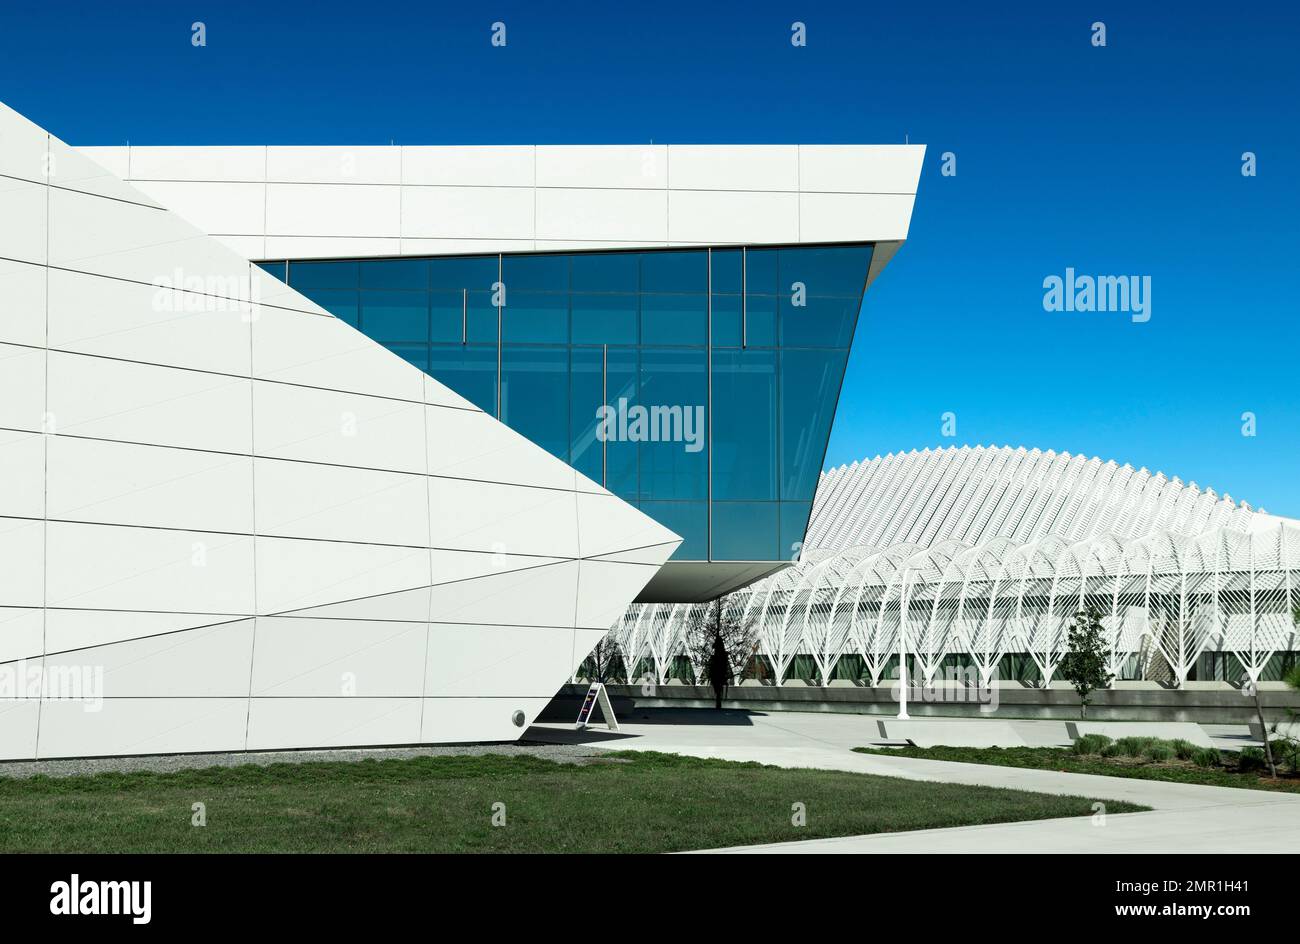 Applied Research Center and Innovation, Science and Technology building at Florida Polytechnic University. Stock Photo